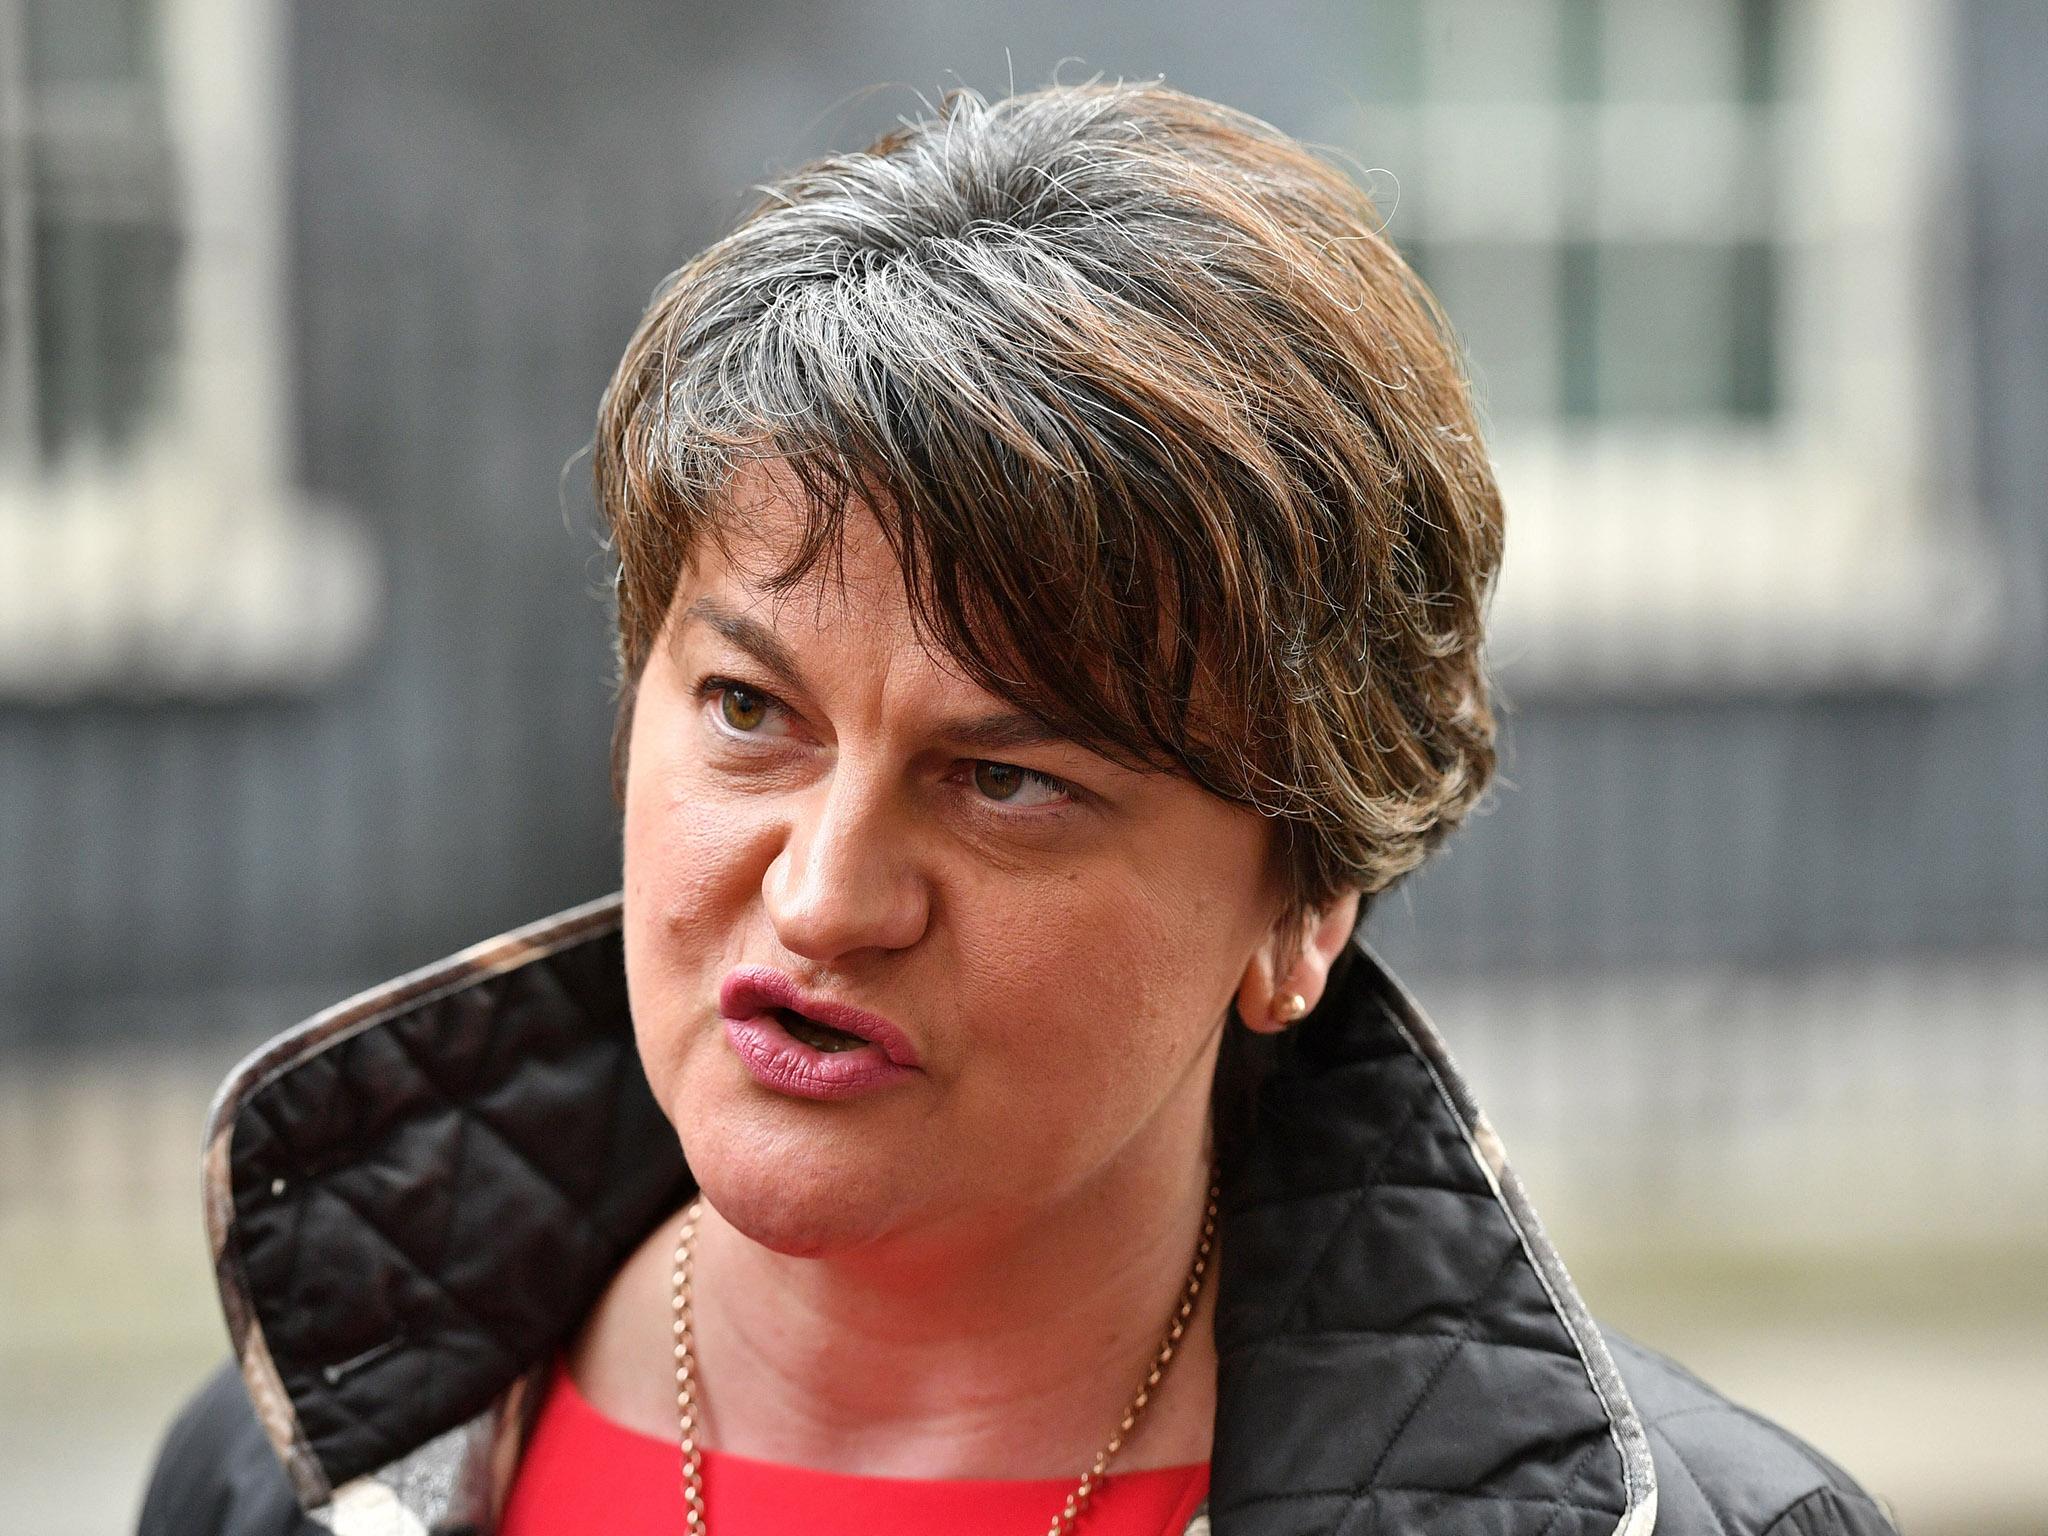 The DUP, led by Arlene Foster, spent a £425,000 donation on the Brexit campaign, and will not have to name the source of the money